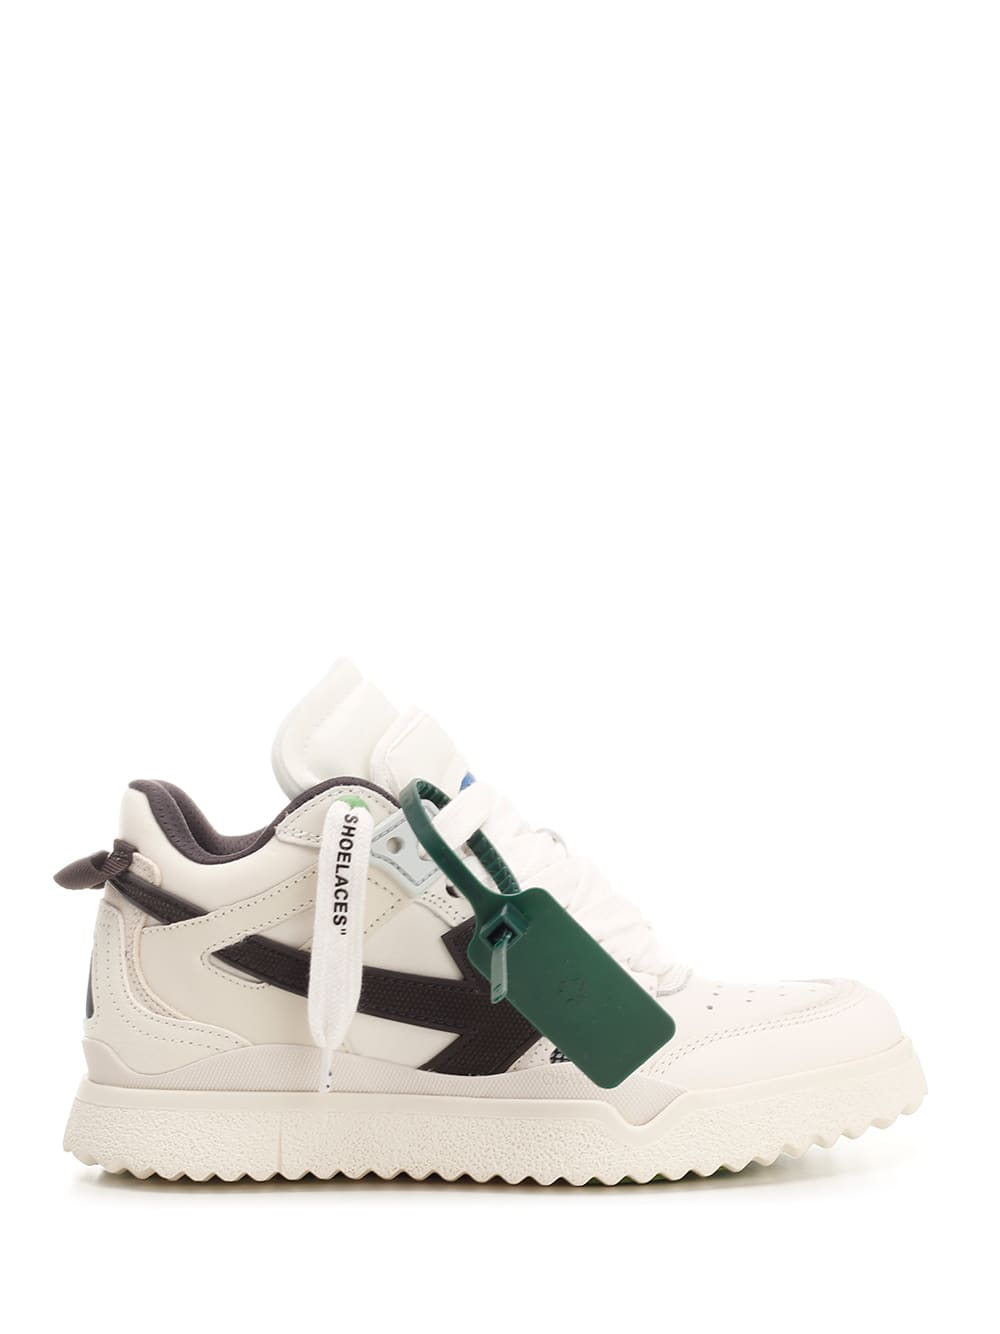 OFF-WHITE MID-TOP SNEAKERS